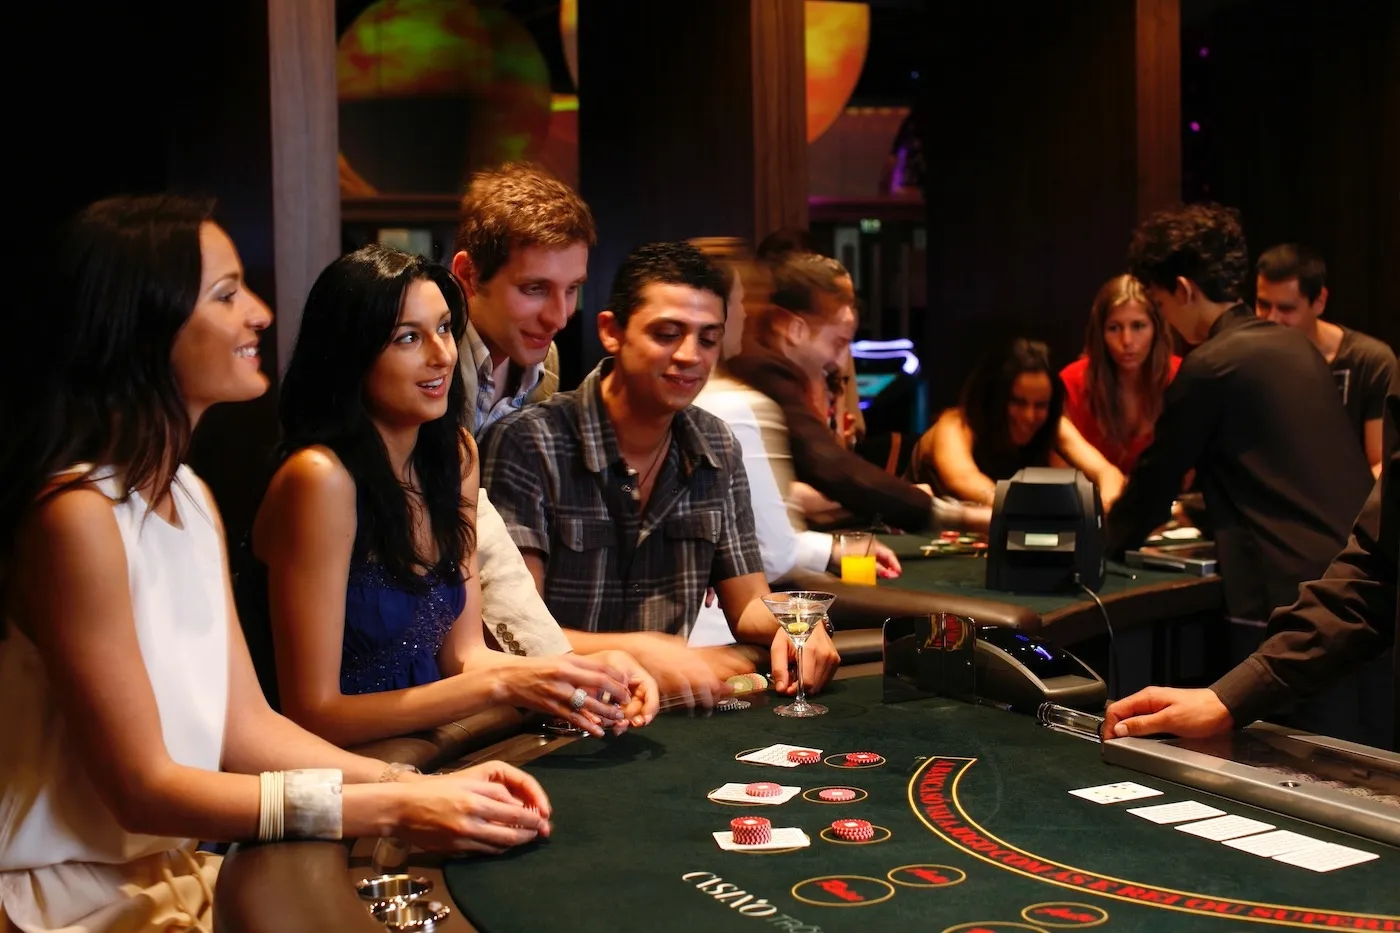 5 Brilliant Ways To Teach Your Audience About casino FairSpin